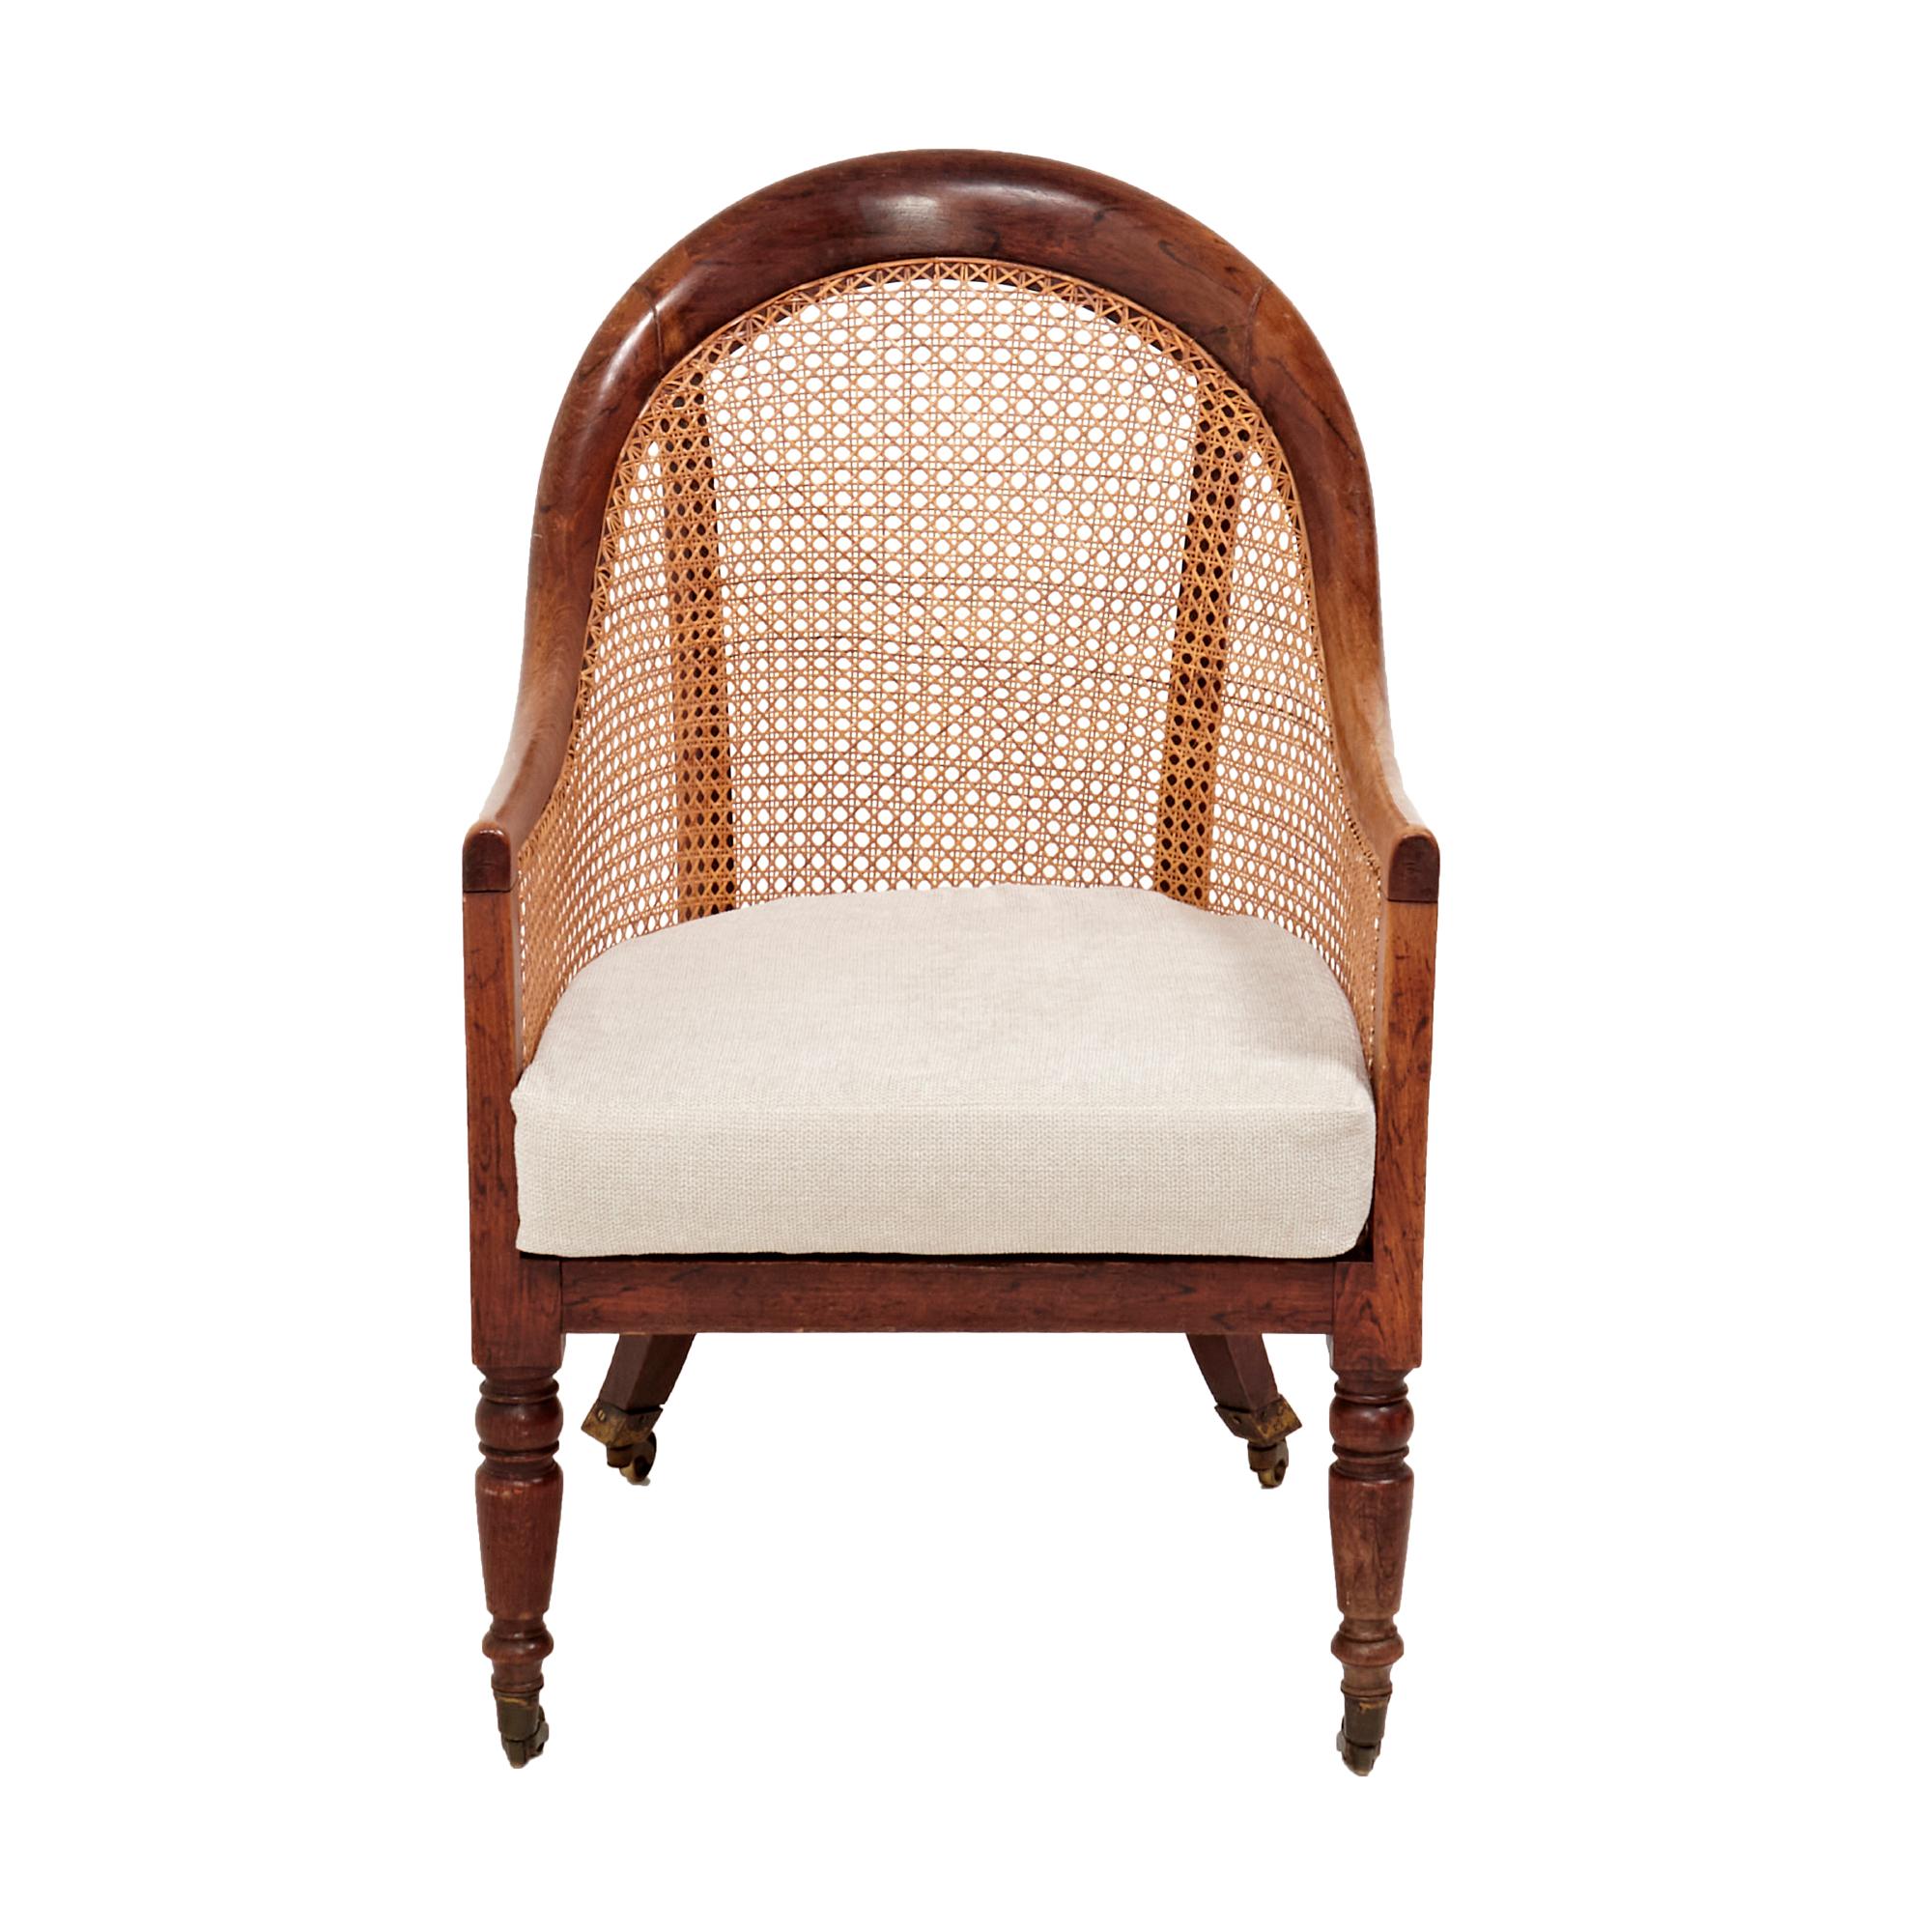 A stunning Bergère stained beech armchair and Bergère mahogany gentleman’s library chair.

The chairs features the original caning on the backrests and arms while the seat cushions have been newly reupholstered in soft grey fabric for the ultimate